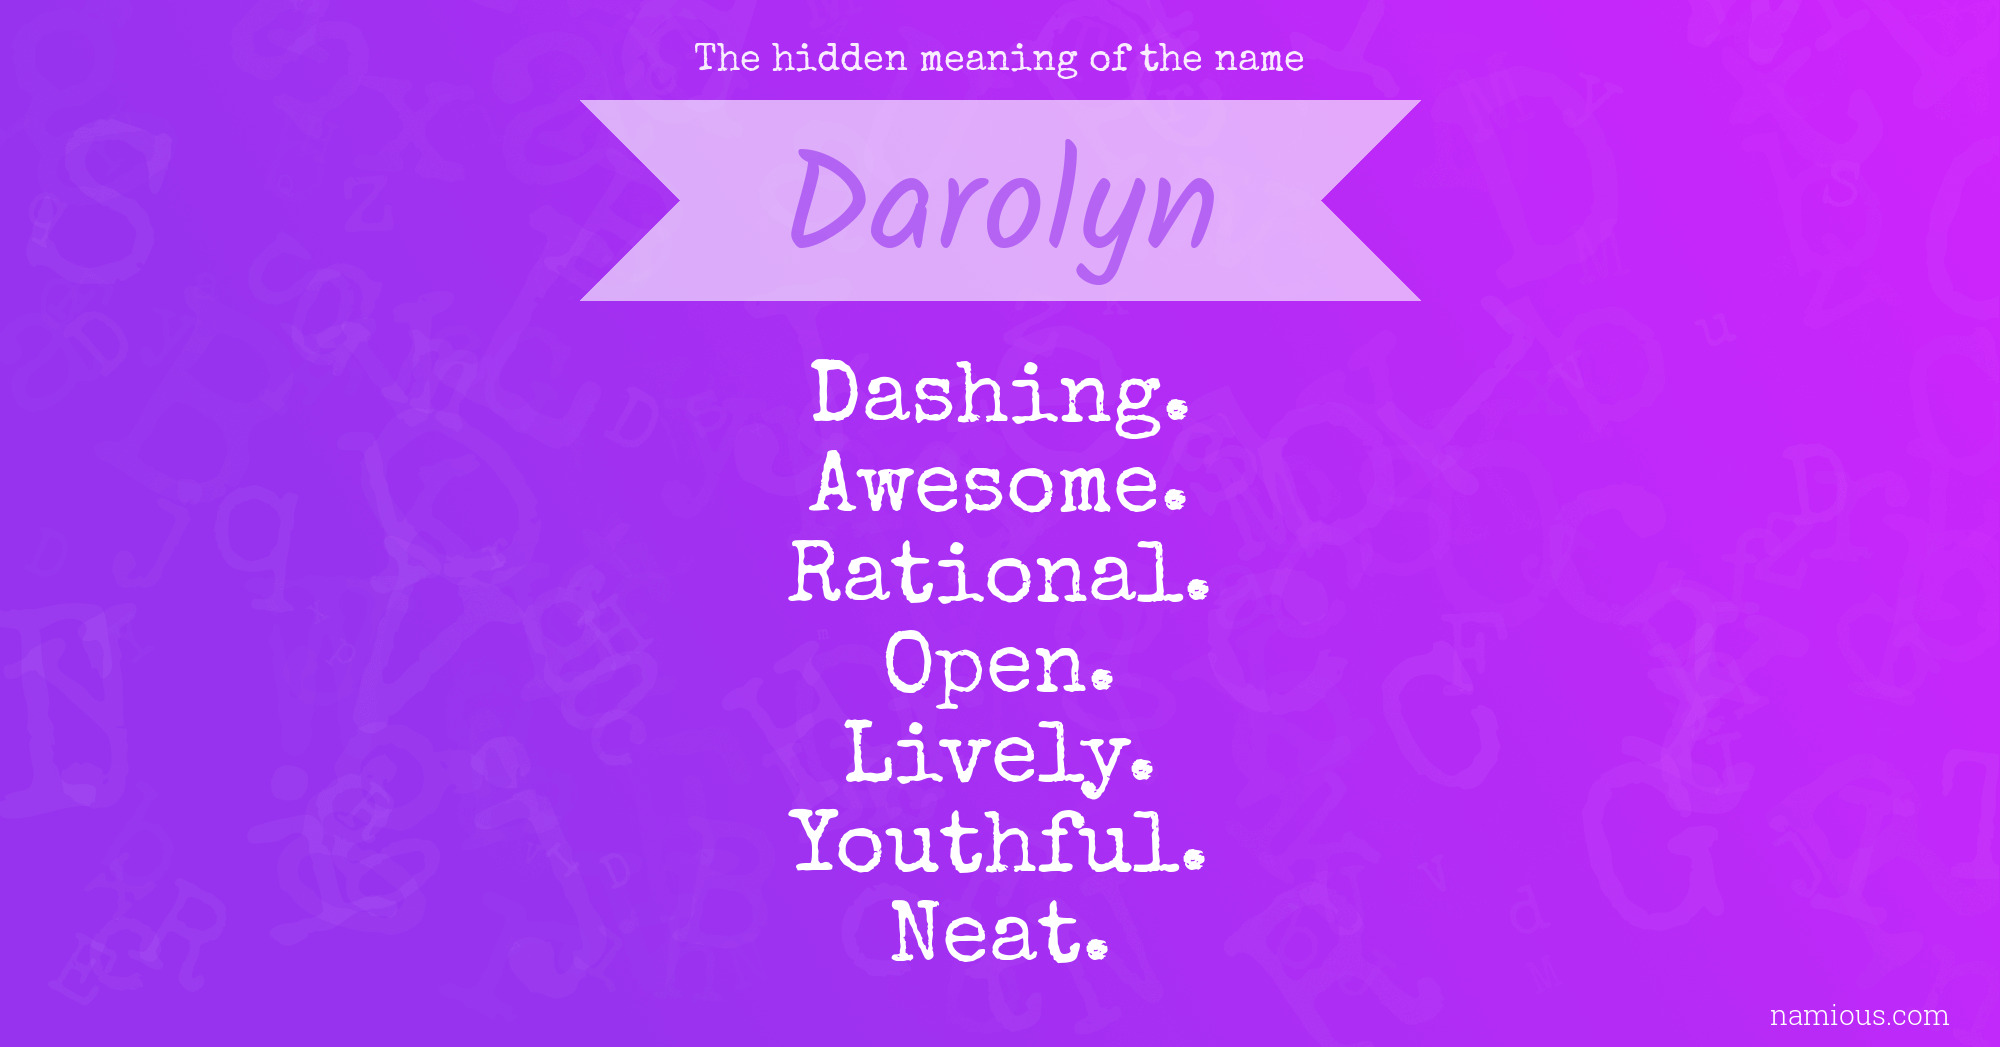 The hidden meaning of the name Darolyn